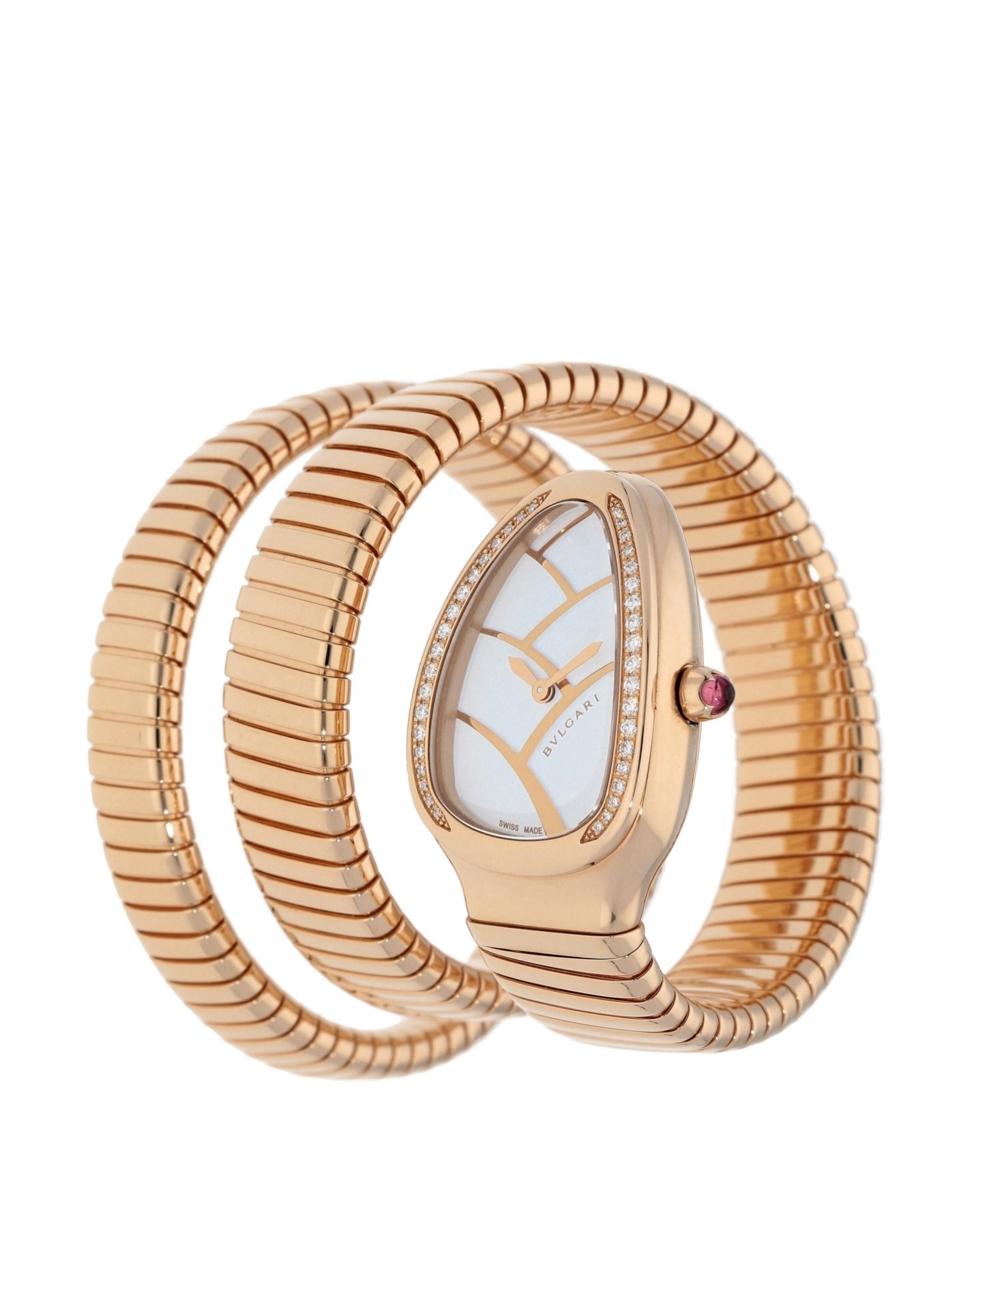 Gender: Women
Case material: Rose Gold
Dial color: White
Strap material: Rose Gold
Movement: Quartz Battery
Reference number: 102450
Water resistance: 30 m (98 ft)
Crystal: Sapphire Glass
Case Diameter [mm]: 35.0
Internal Reference: 10107658

The